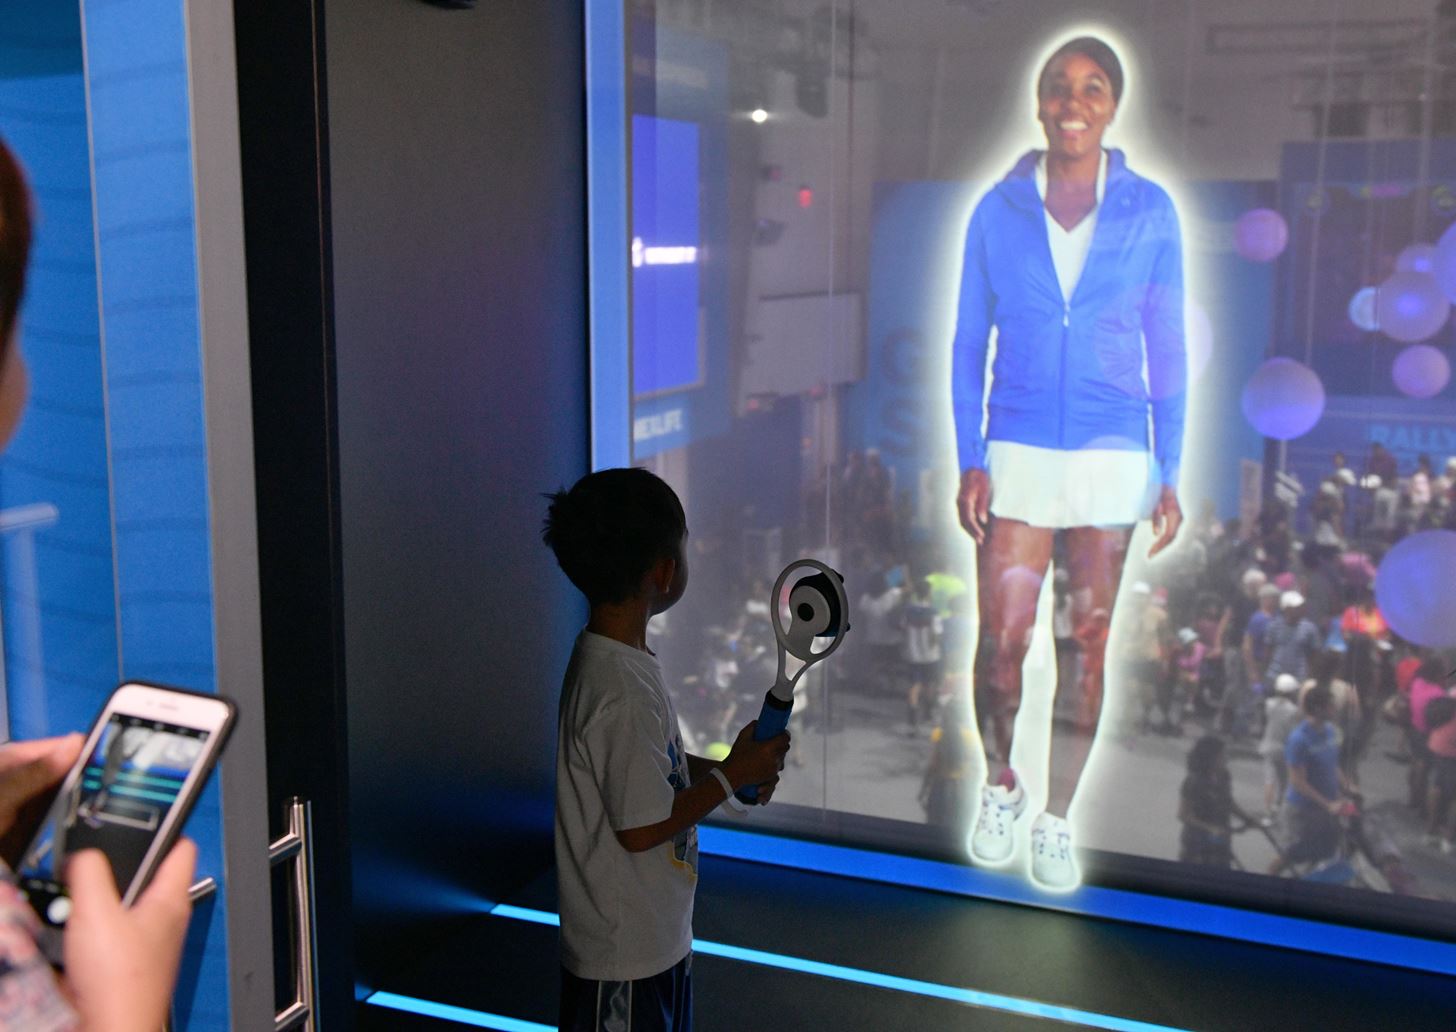 Venus Williams Joins Her Sister in AR via American Express Installation at the US Open